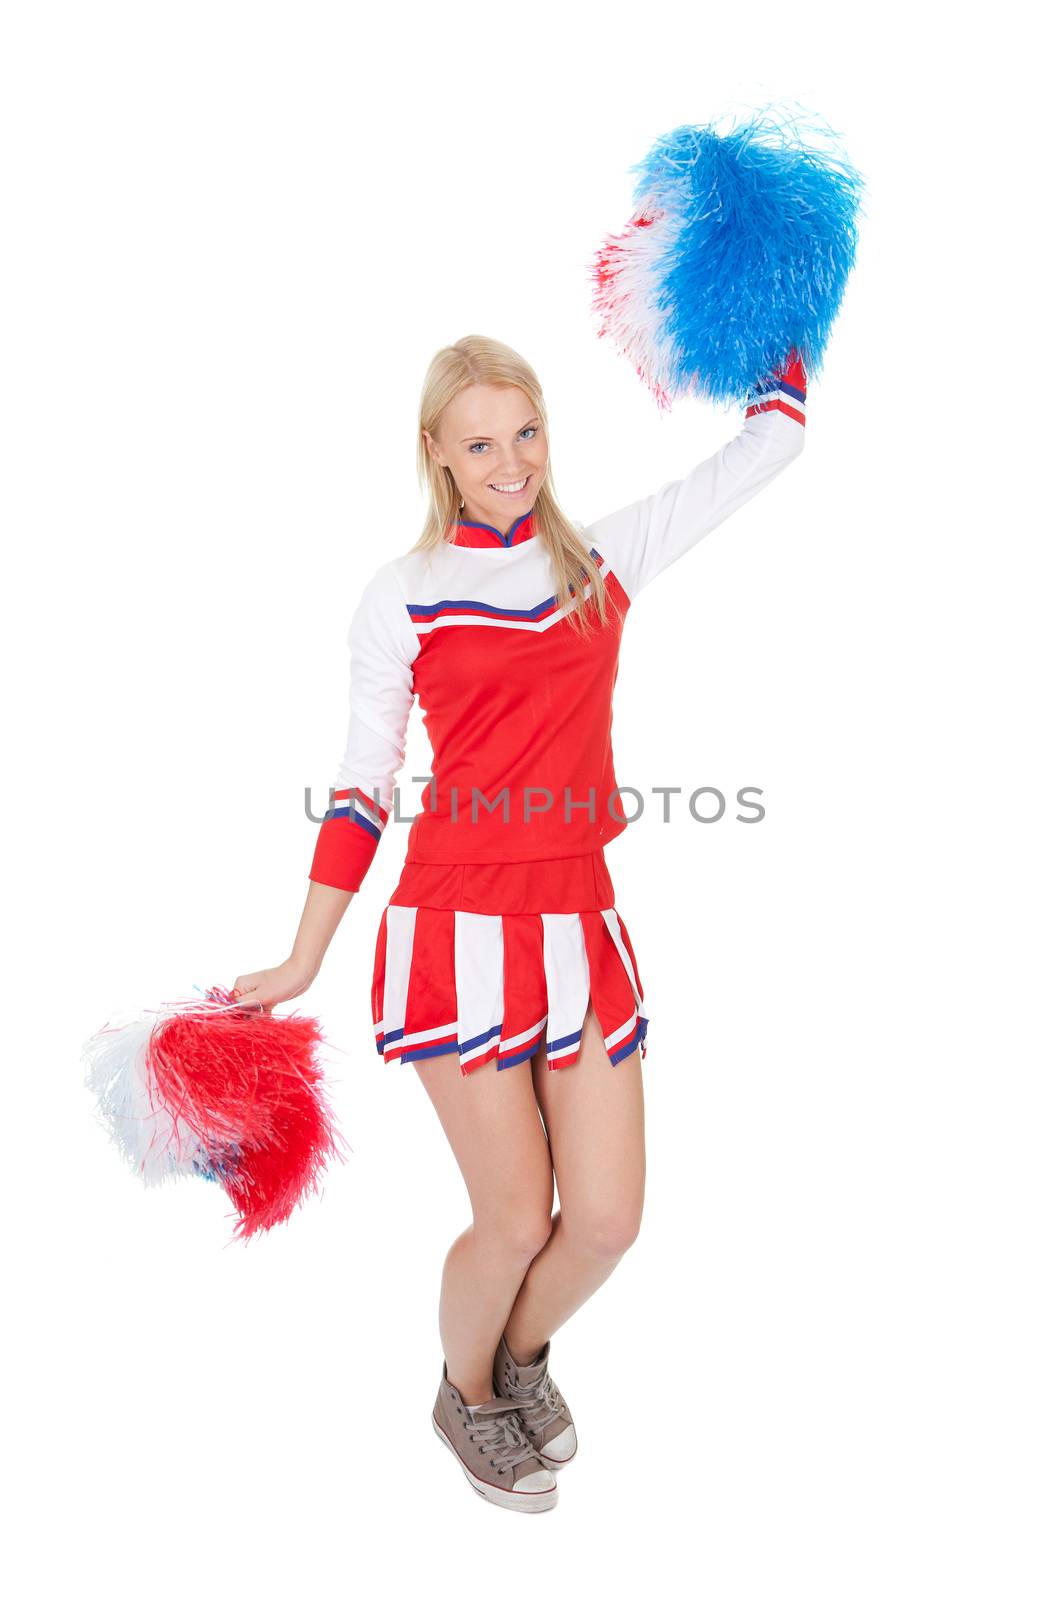 Smiling beautiful cheerleader with pompoms. by AndreyPopov